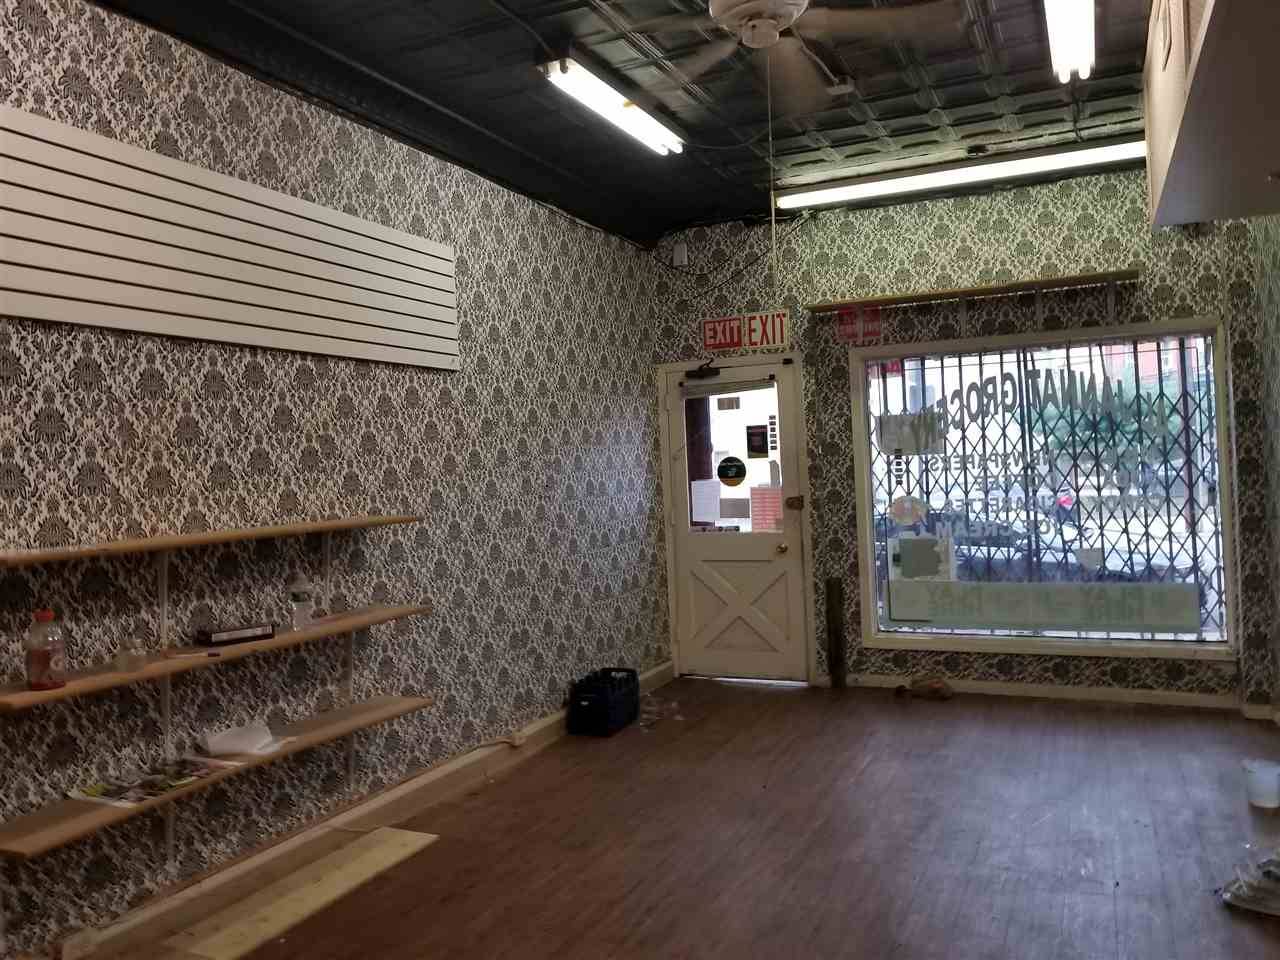 Commercial space for rent with a great location on busy Danforth Avenue